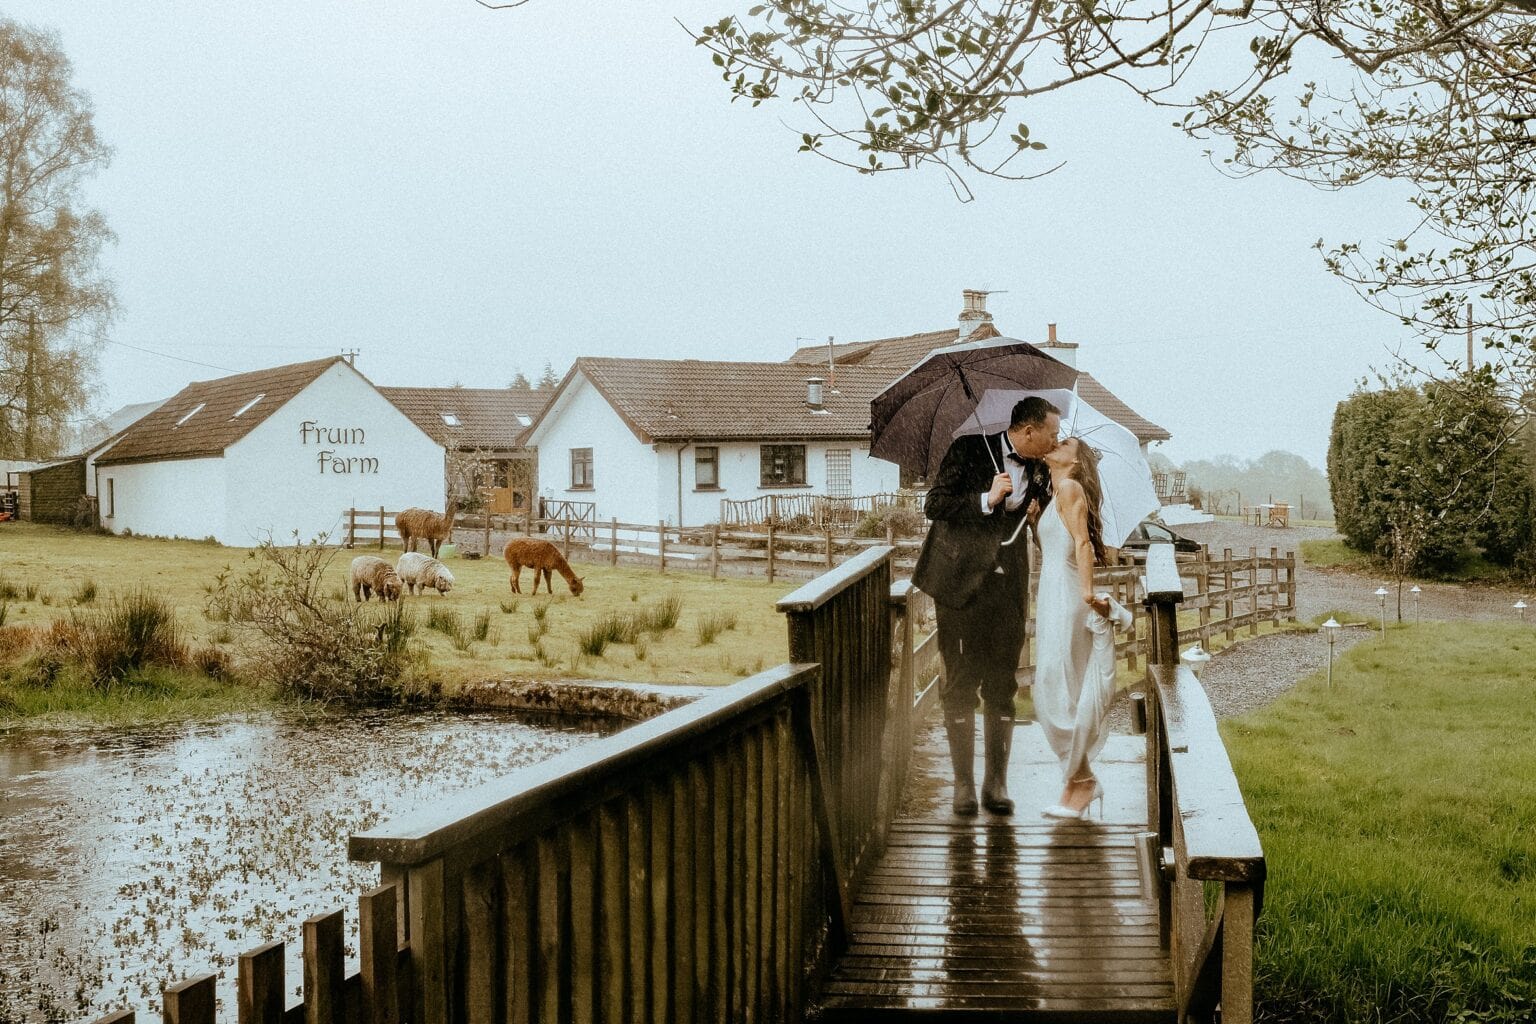 bride and groom standing on small wooden bridge kissing under umbrella on rainy day what to do if it rains on your wedding day